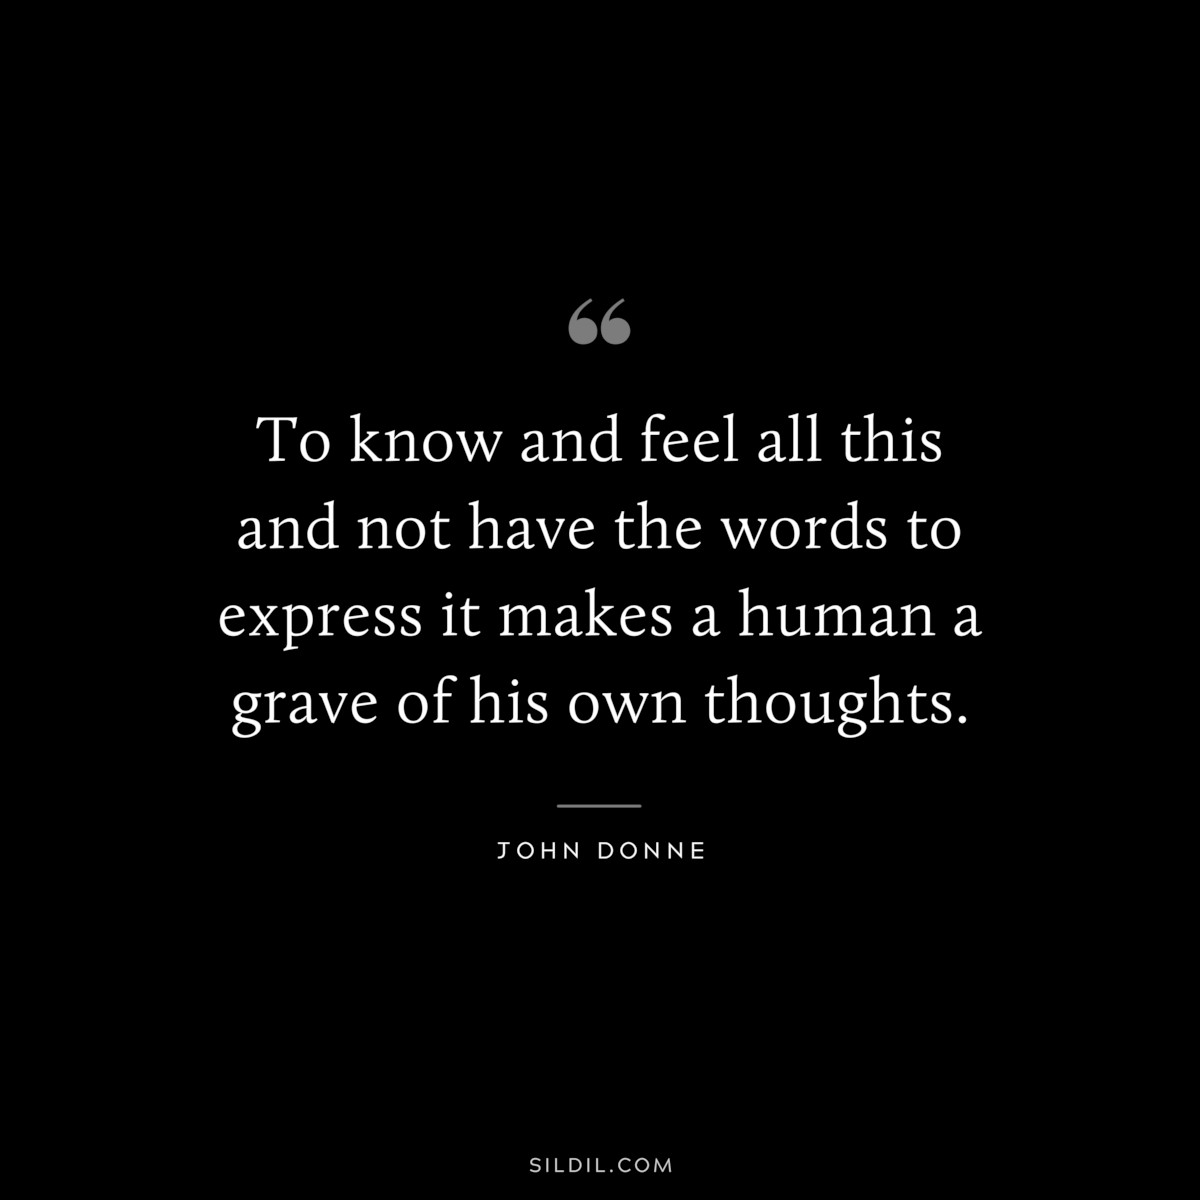 To know and feel all this and not have the words to express it makes a human a grave of his own thoughts. ― John Donne